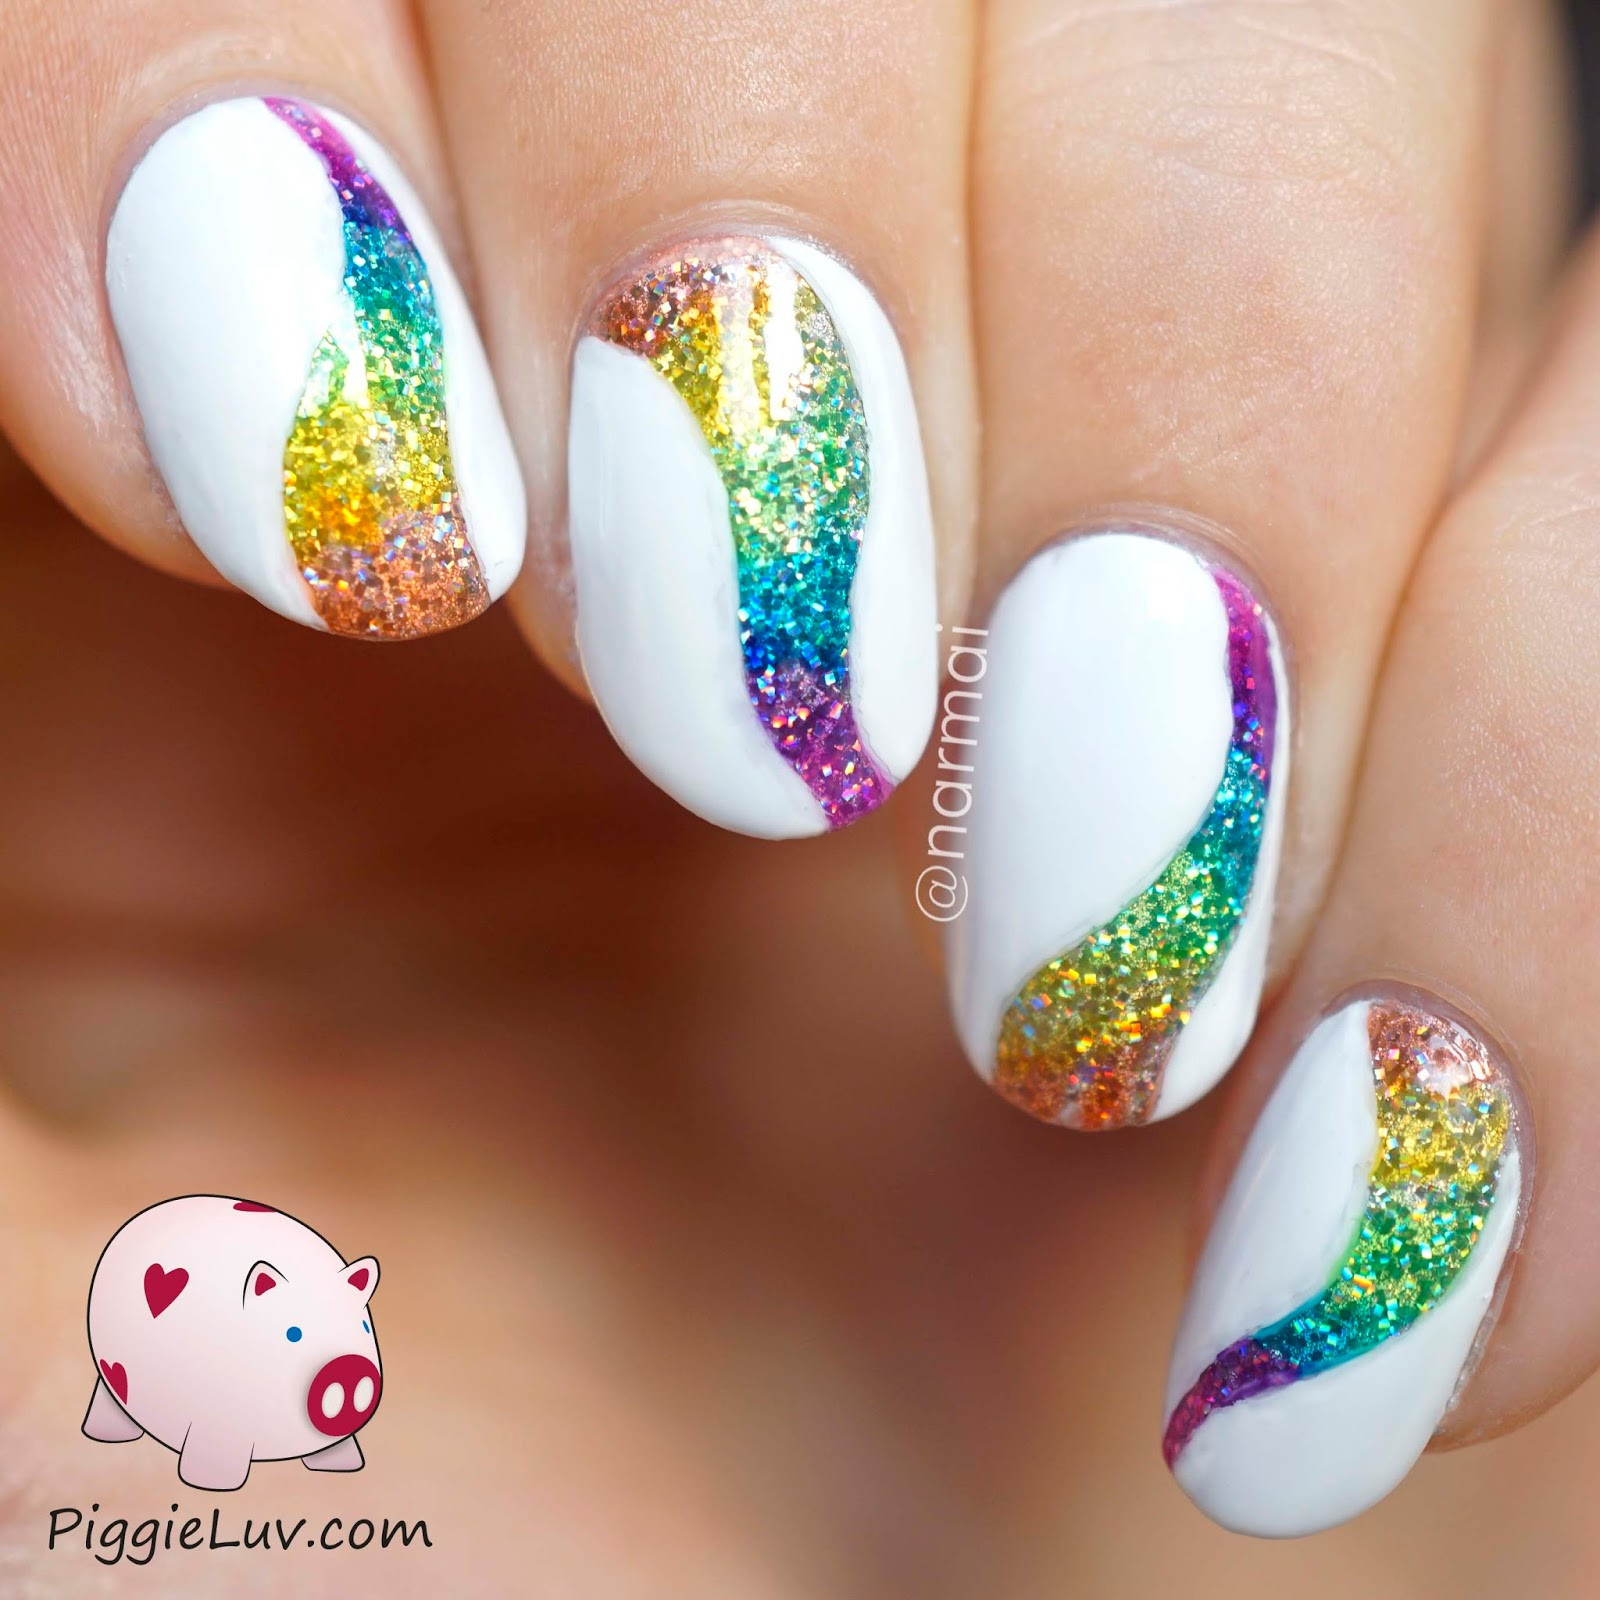 Nails With Glitter
 white tip nail designs with glitter